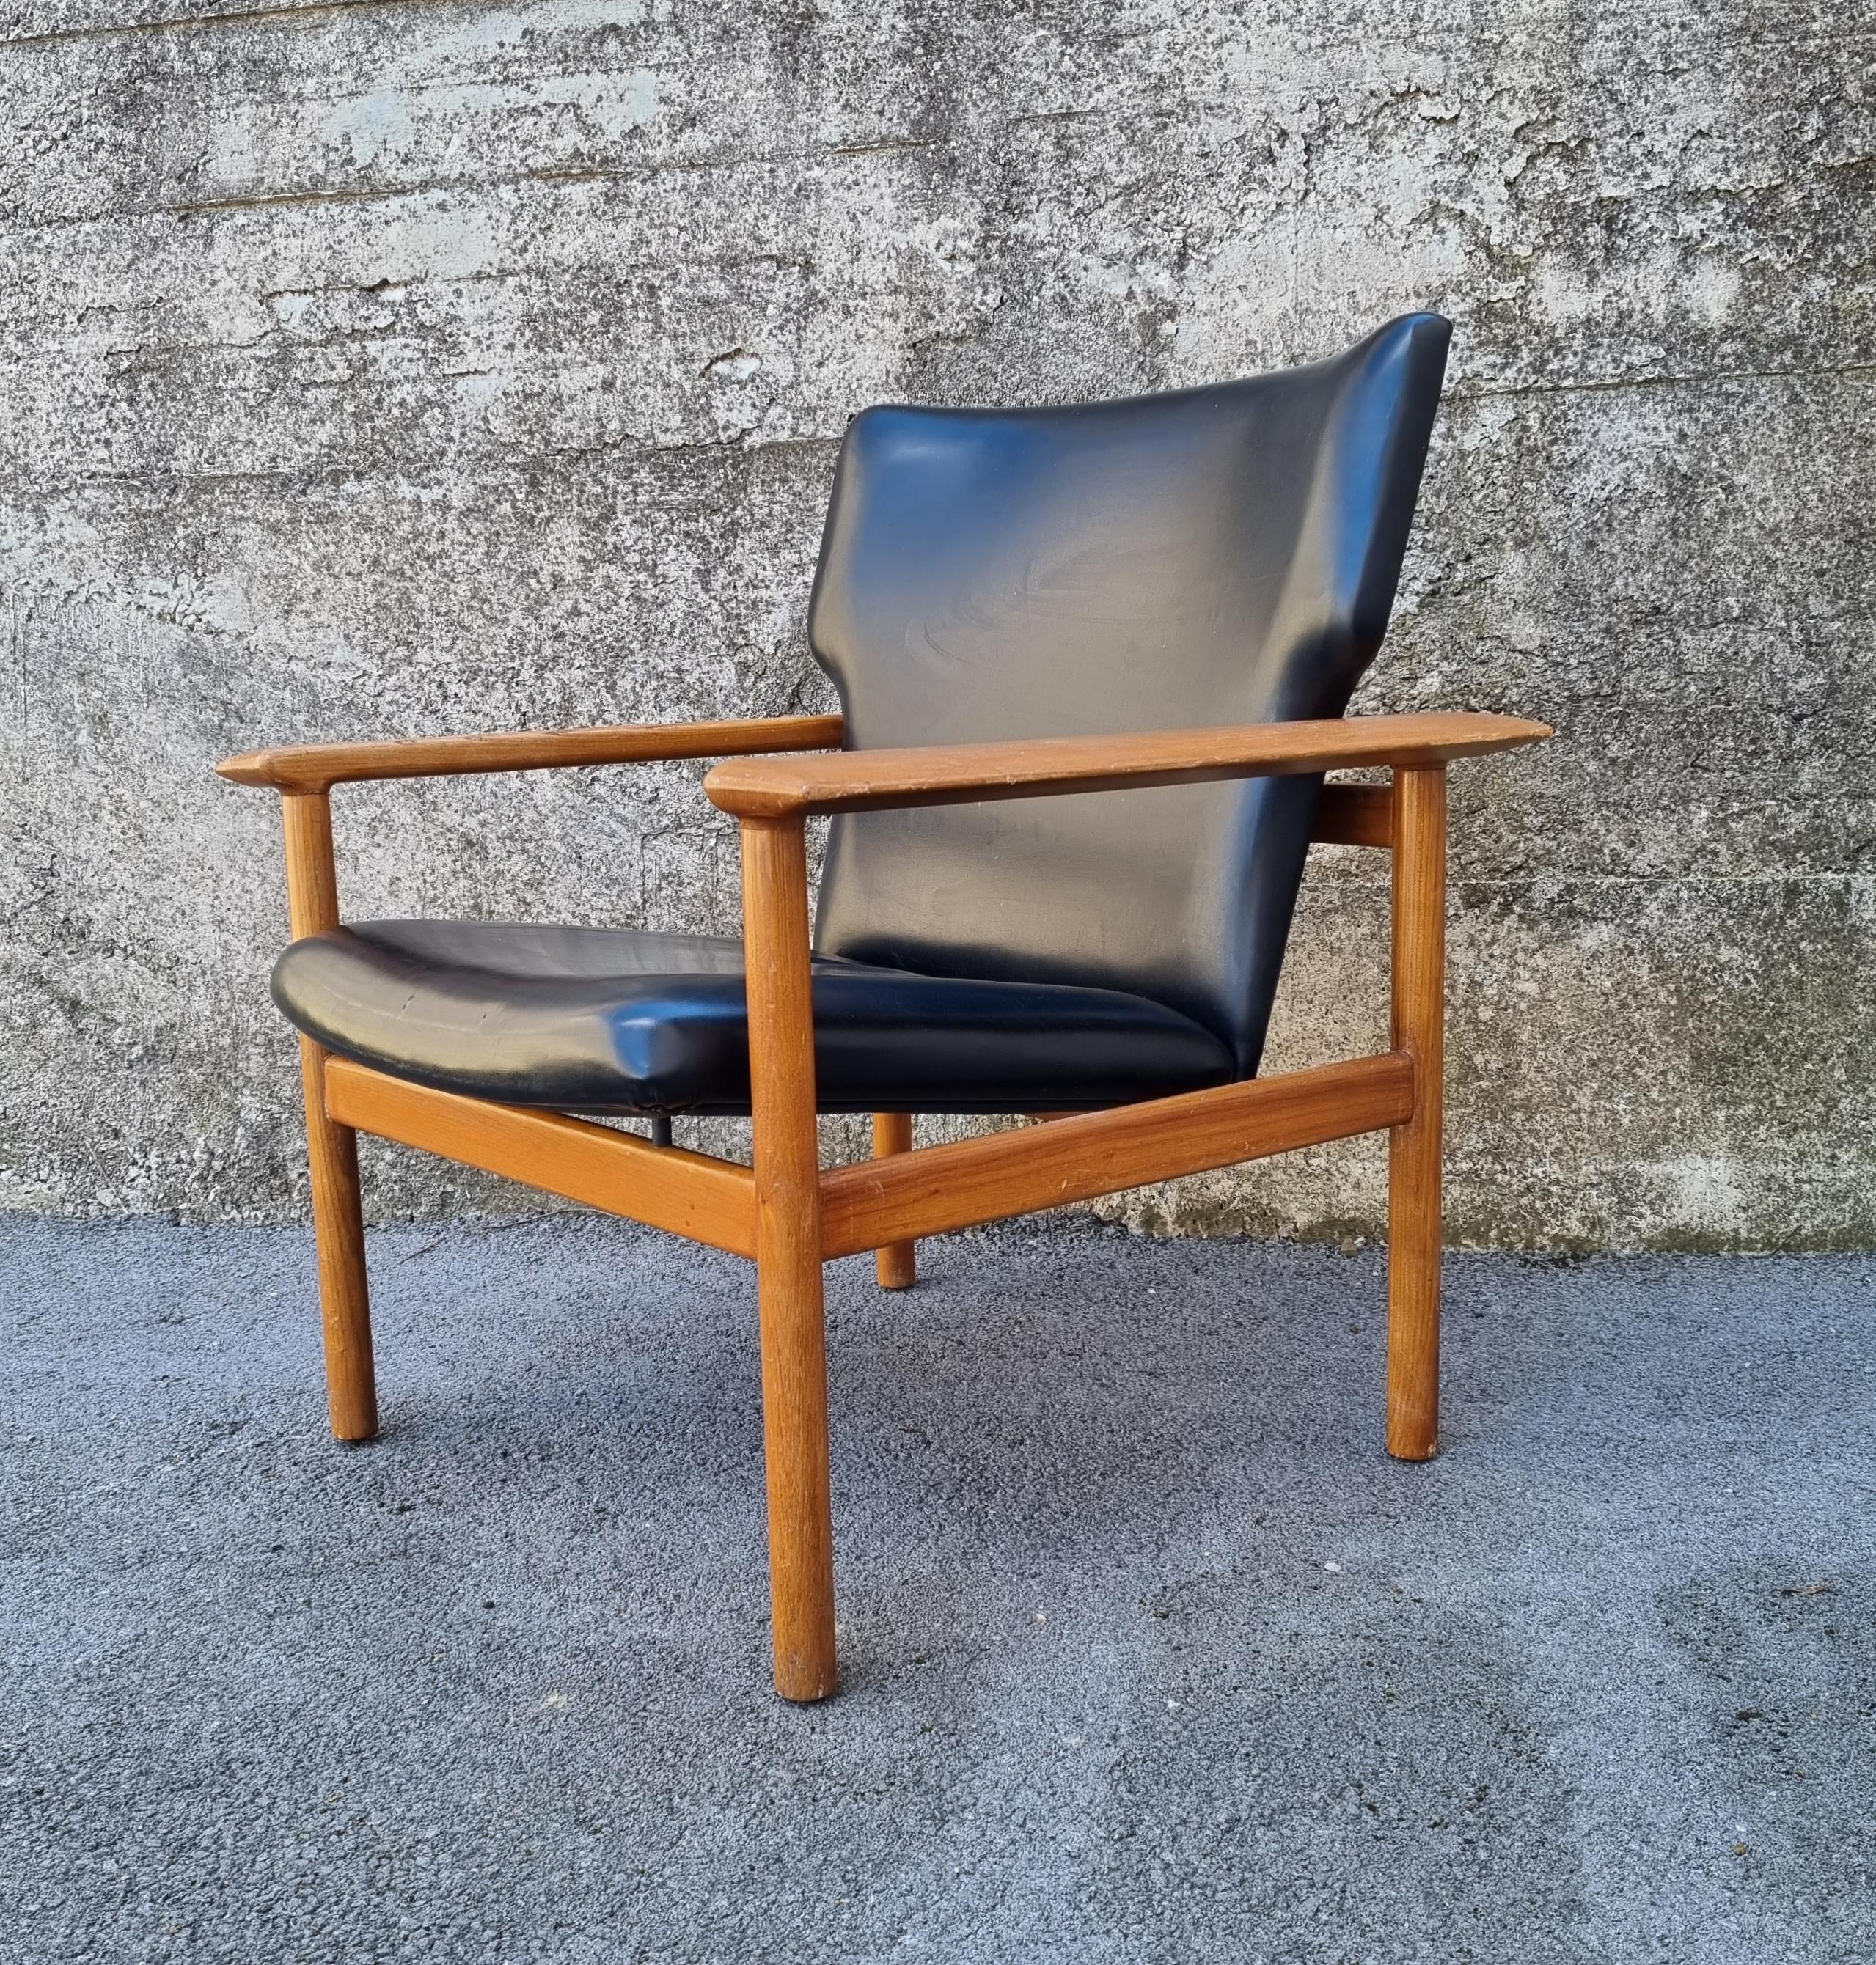 midcentury Italian Leather Armchair designed by Charles F.Joosten and Carlo Zacconi for Framar in the 60s
Very stylish piece of midcentury era.